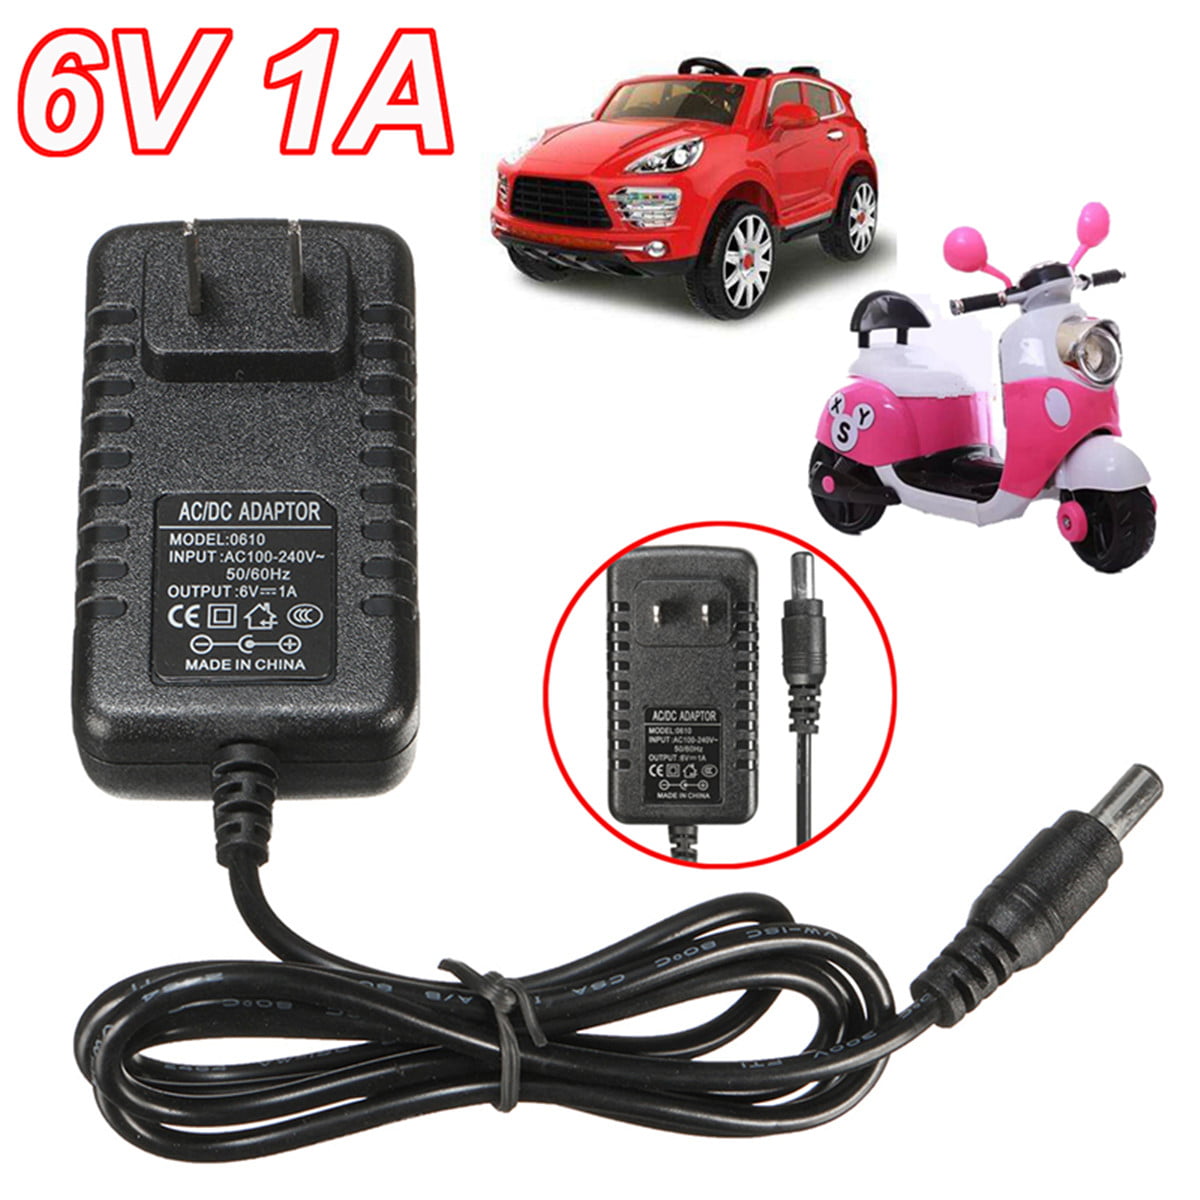 1A 6V AC/DC Power Supply Adapter Charger Plug Mains Transformer For Kids Toy Car 